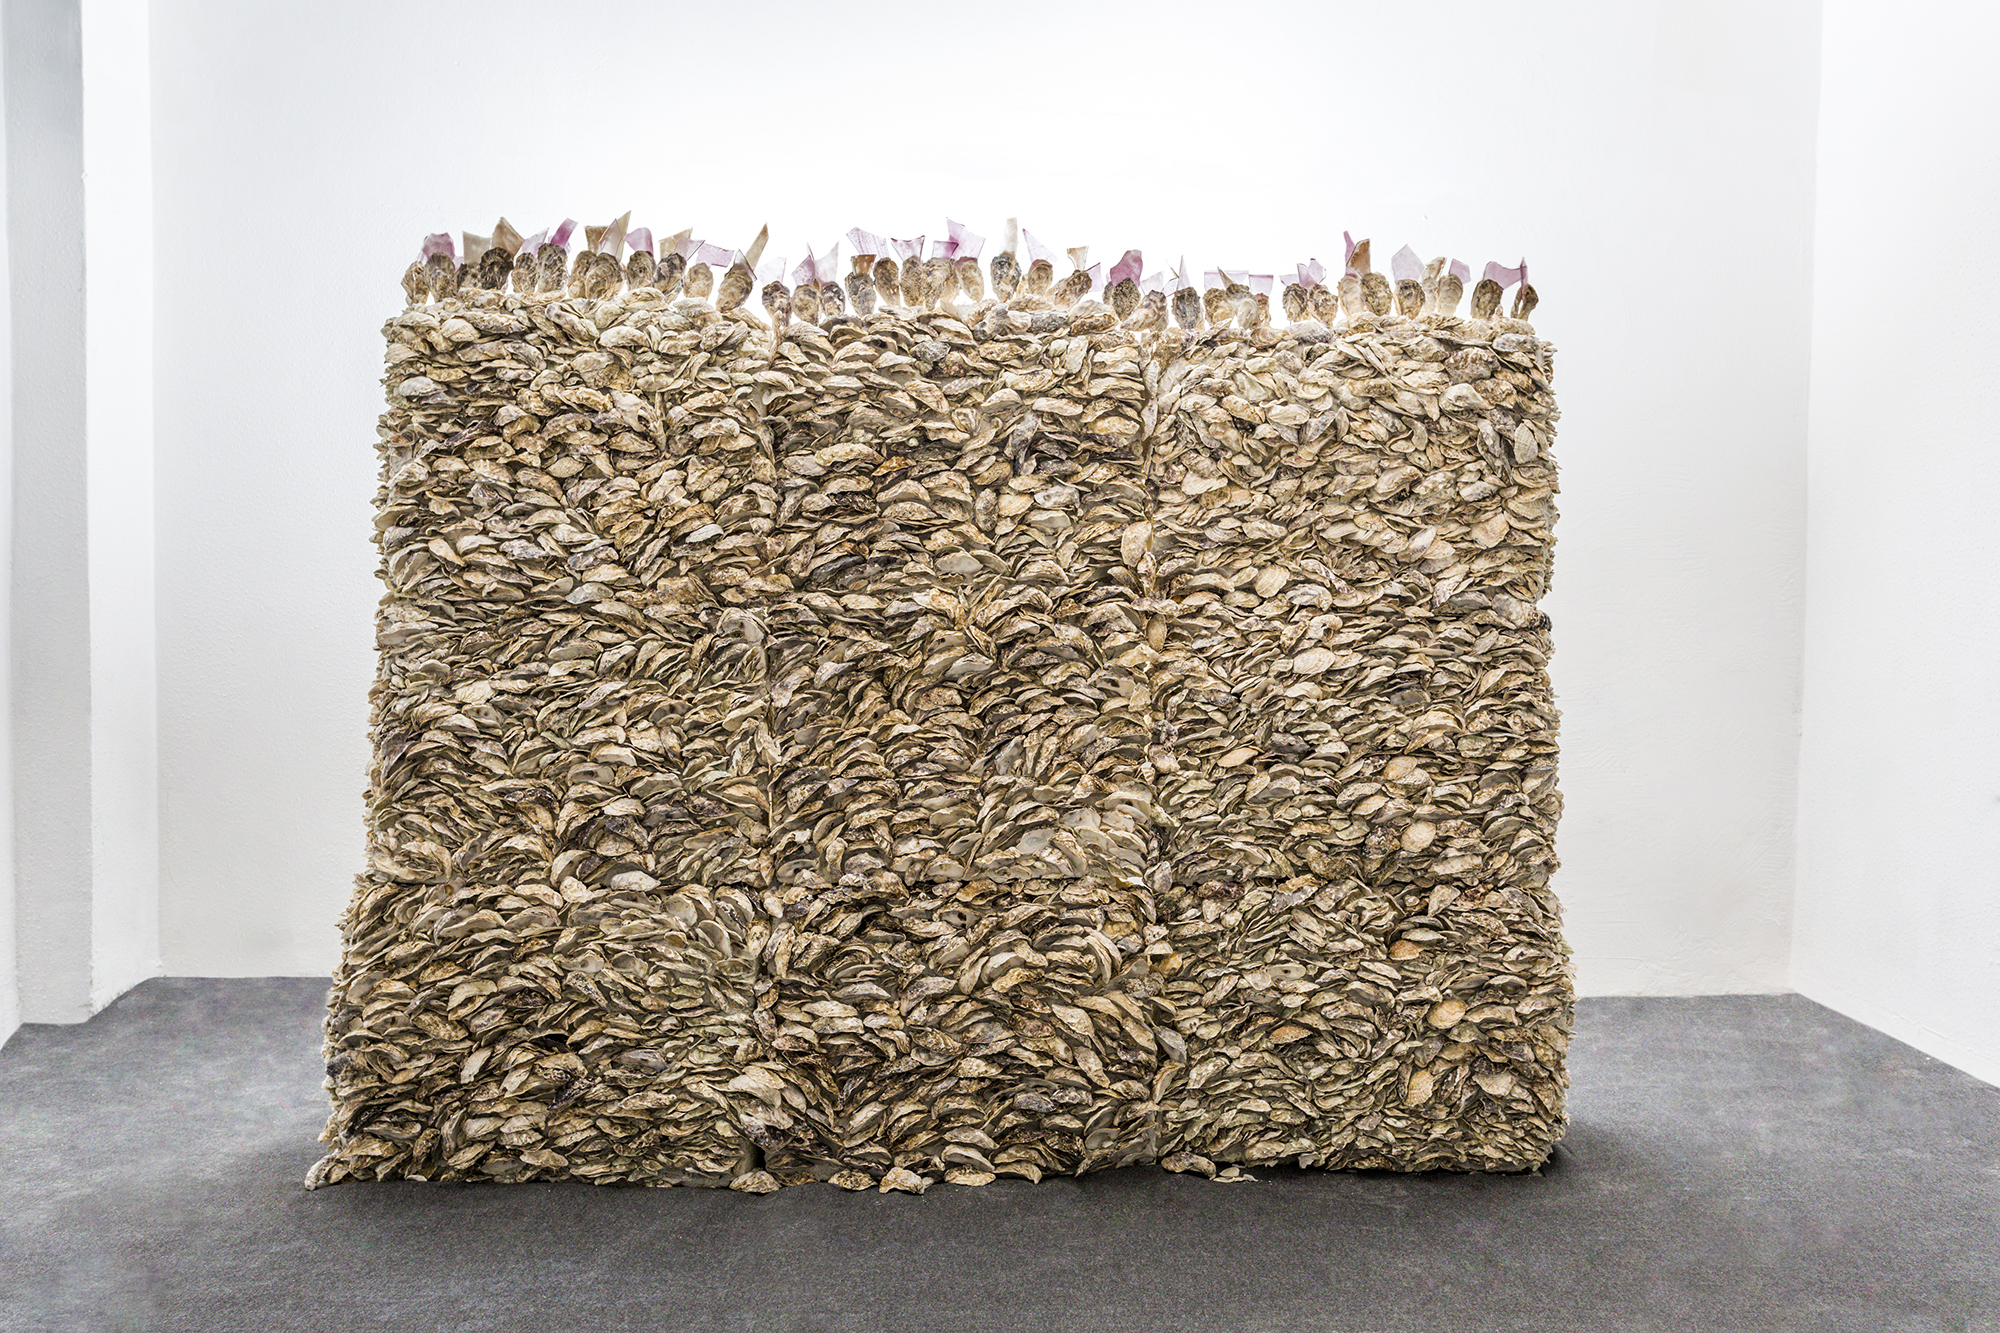 Giuseppina Giordano, THE WALL OF DELICACY (ode to China), 2018 / oyster shells, glass / 250x190x60 cm